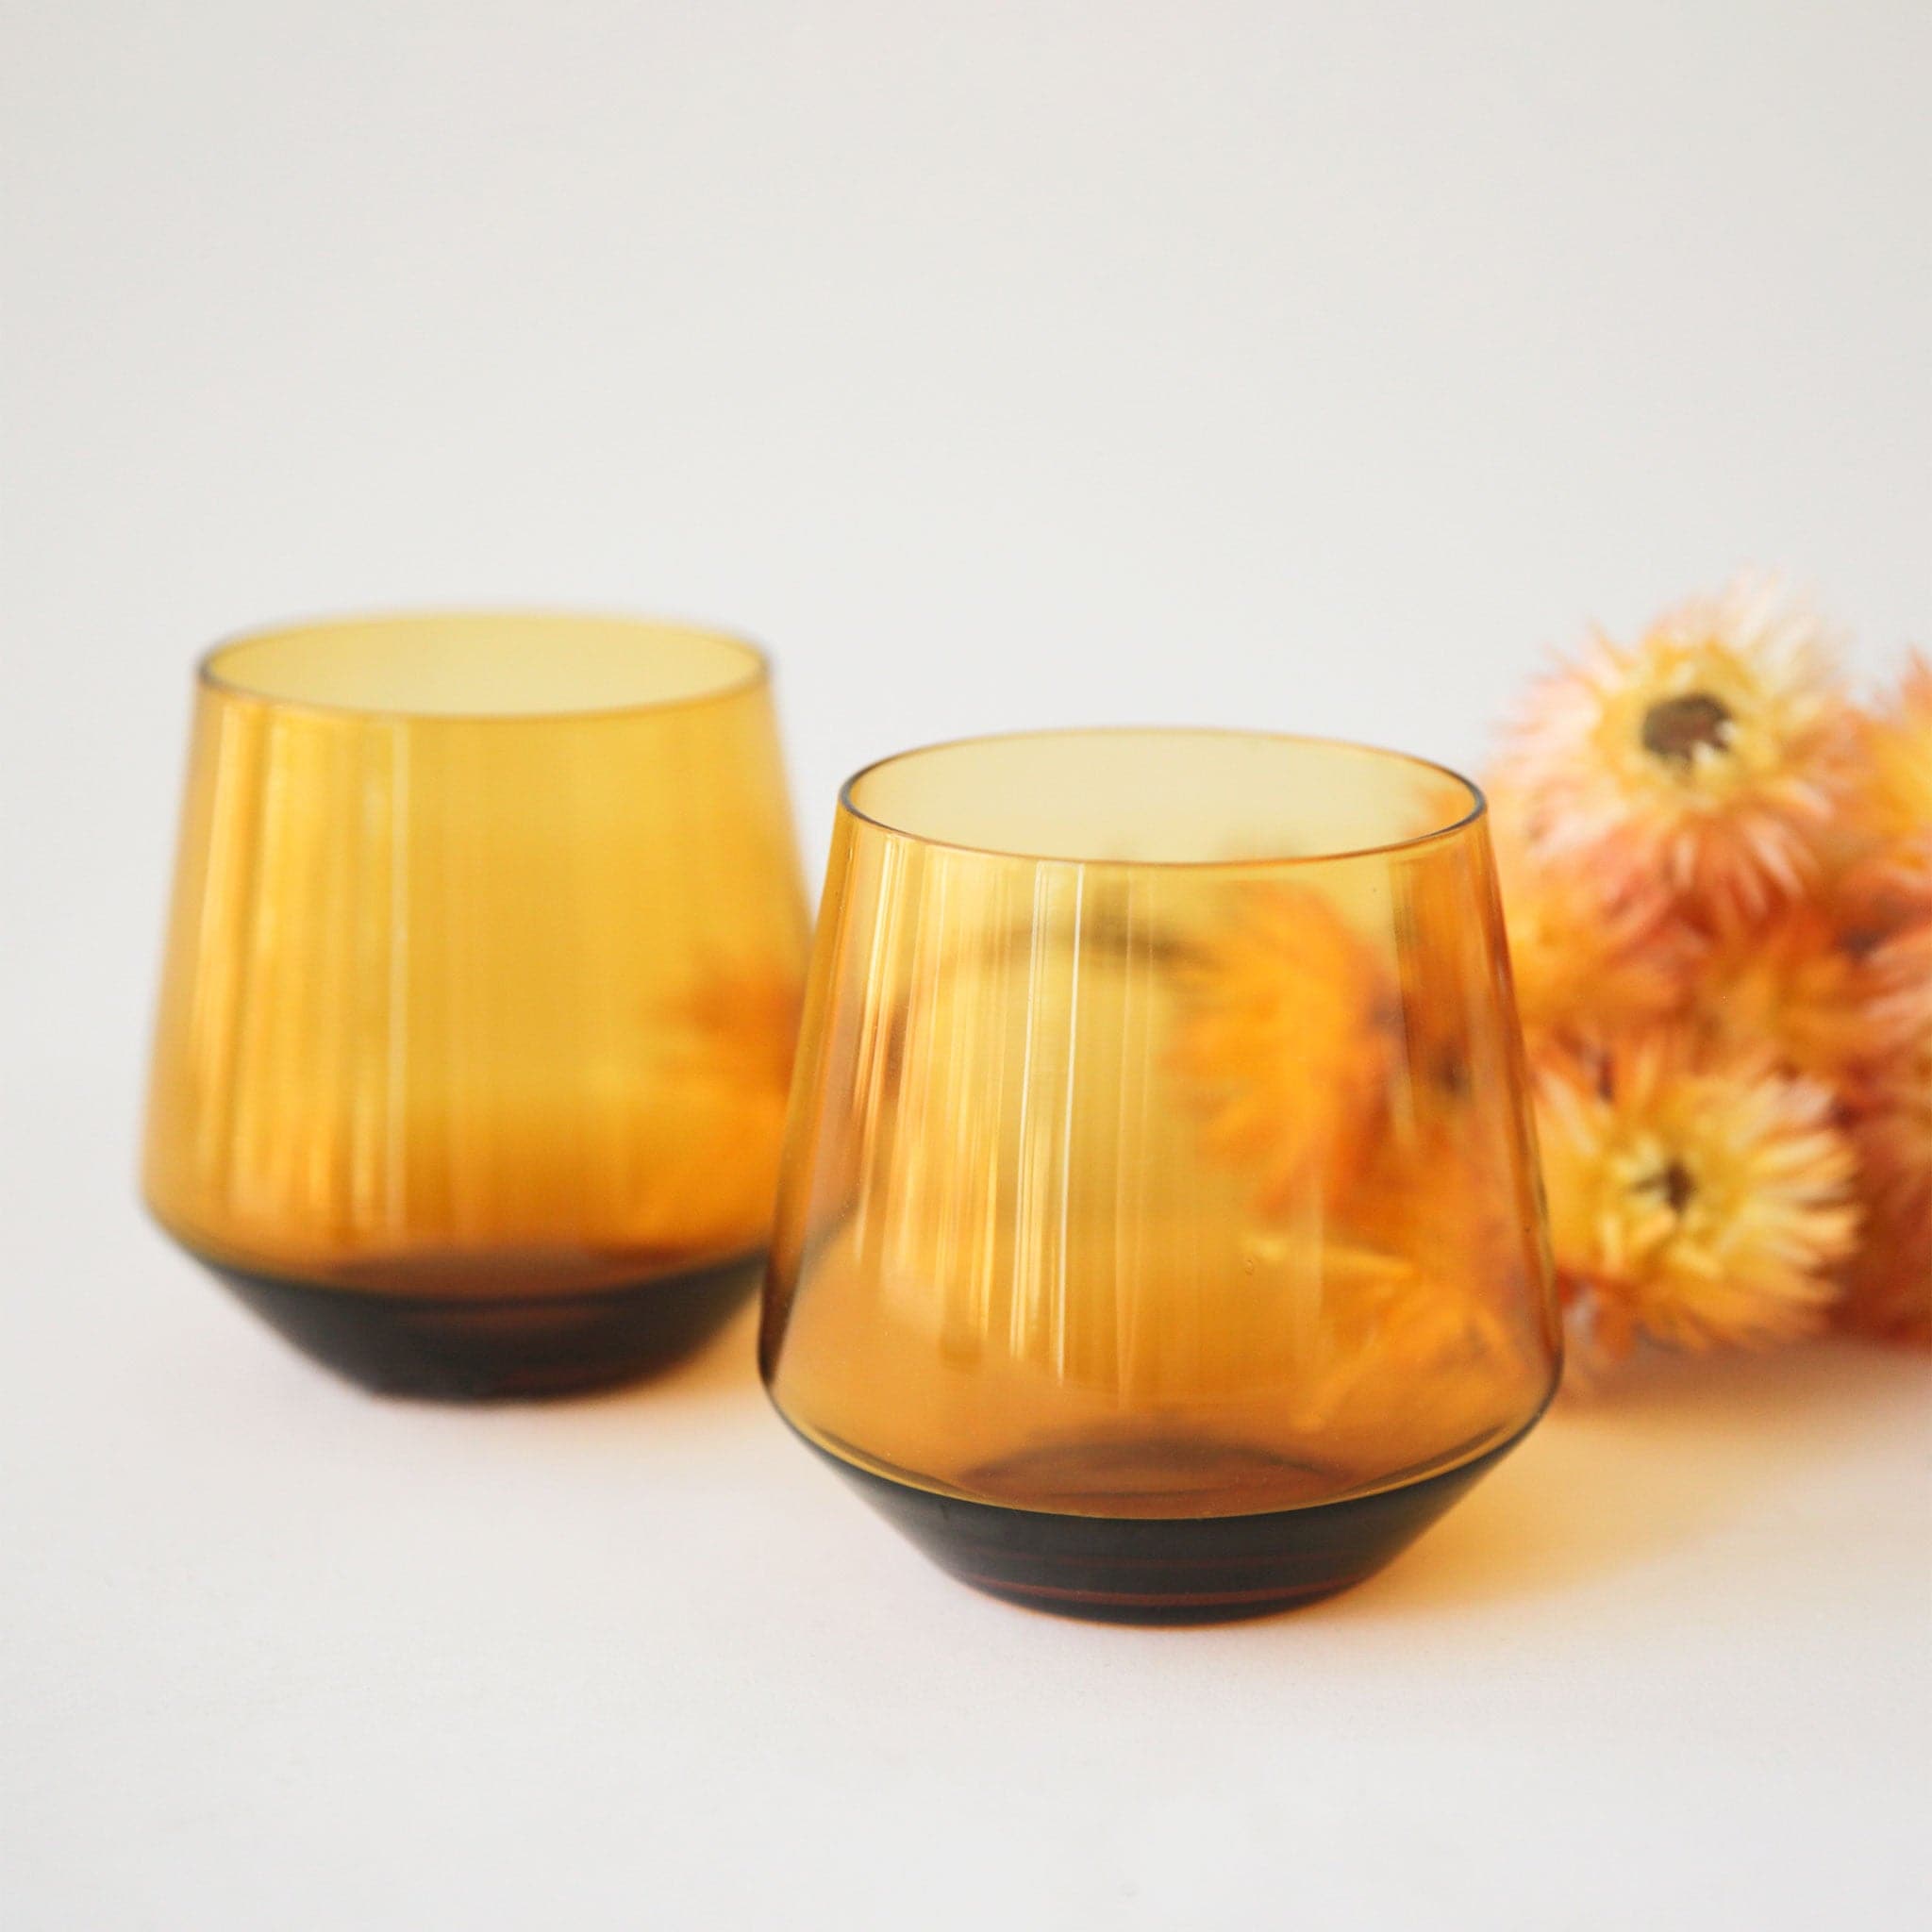 Amber colored stemless drinking glasses with an angled / slightly curved bottom edge and staged next to orange dried florals.